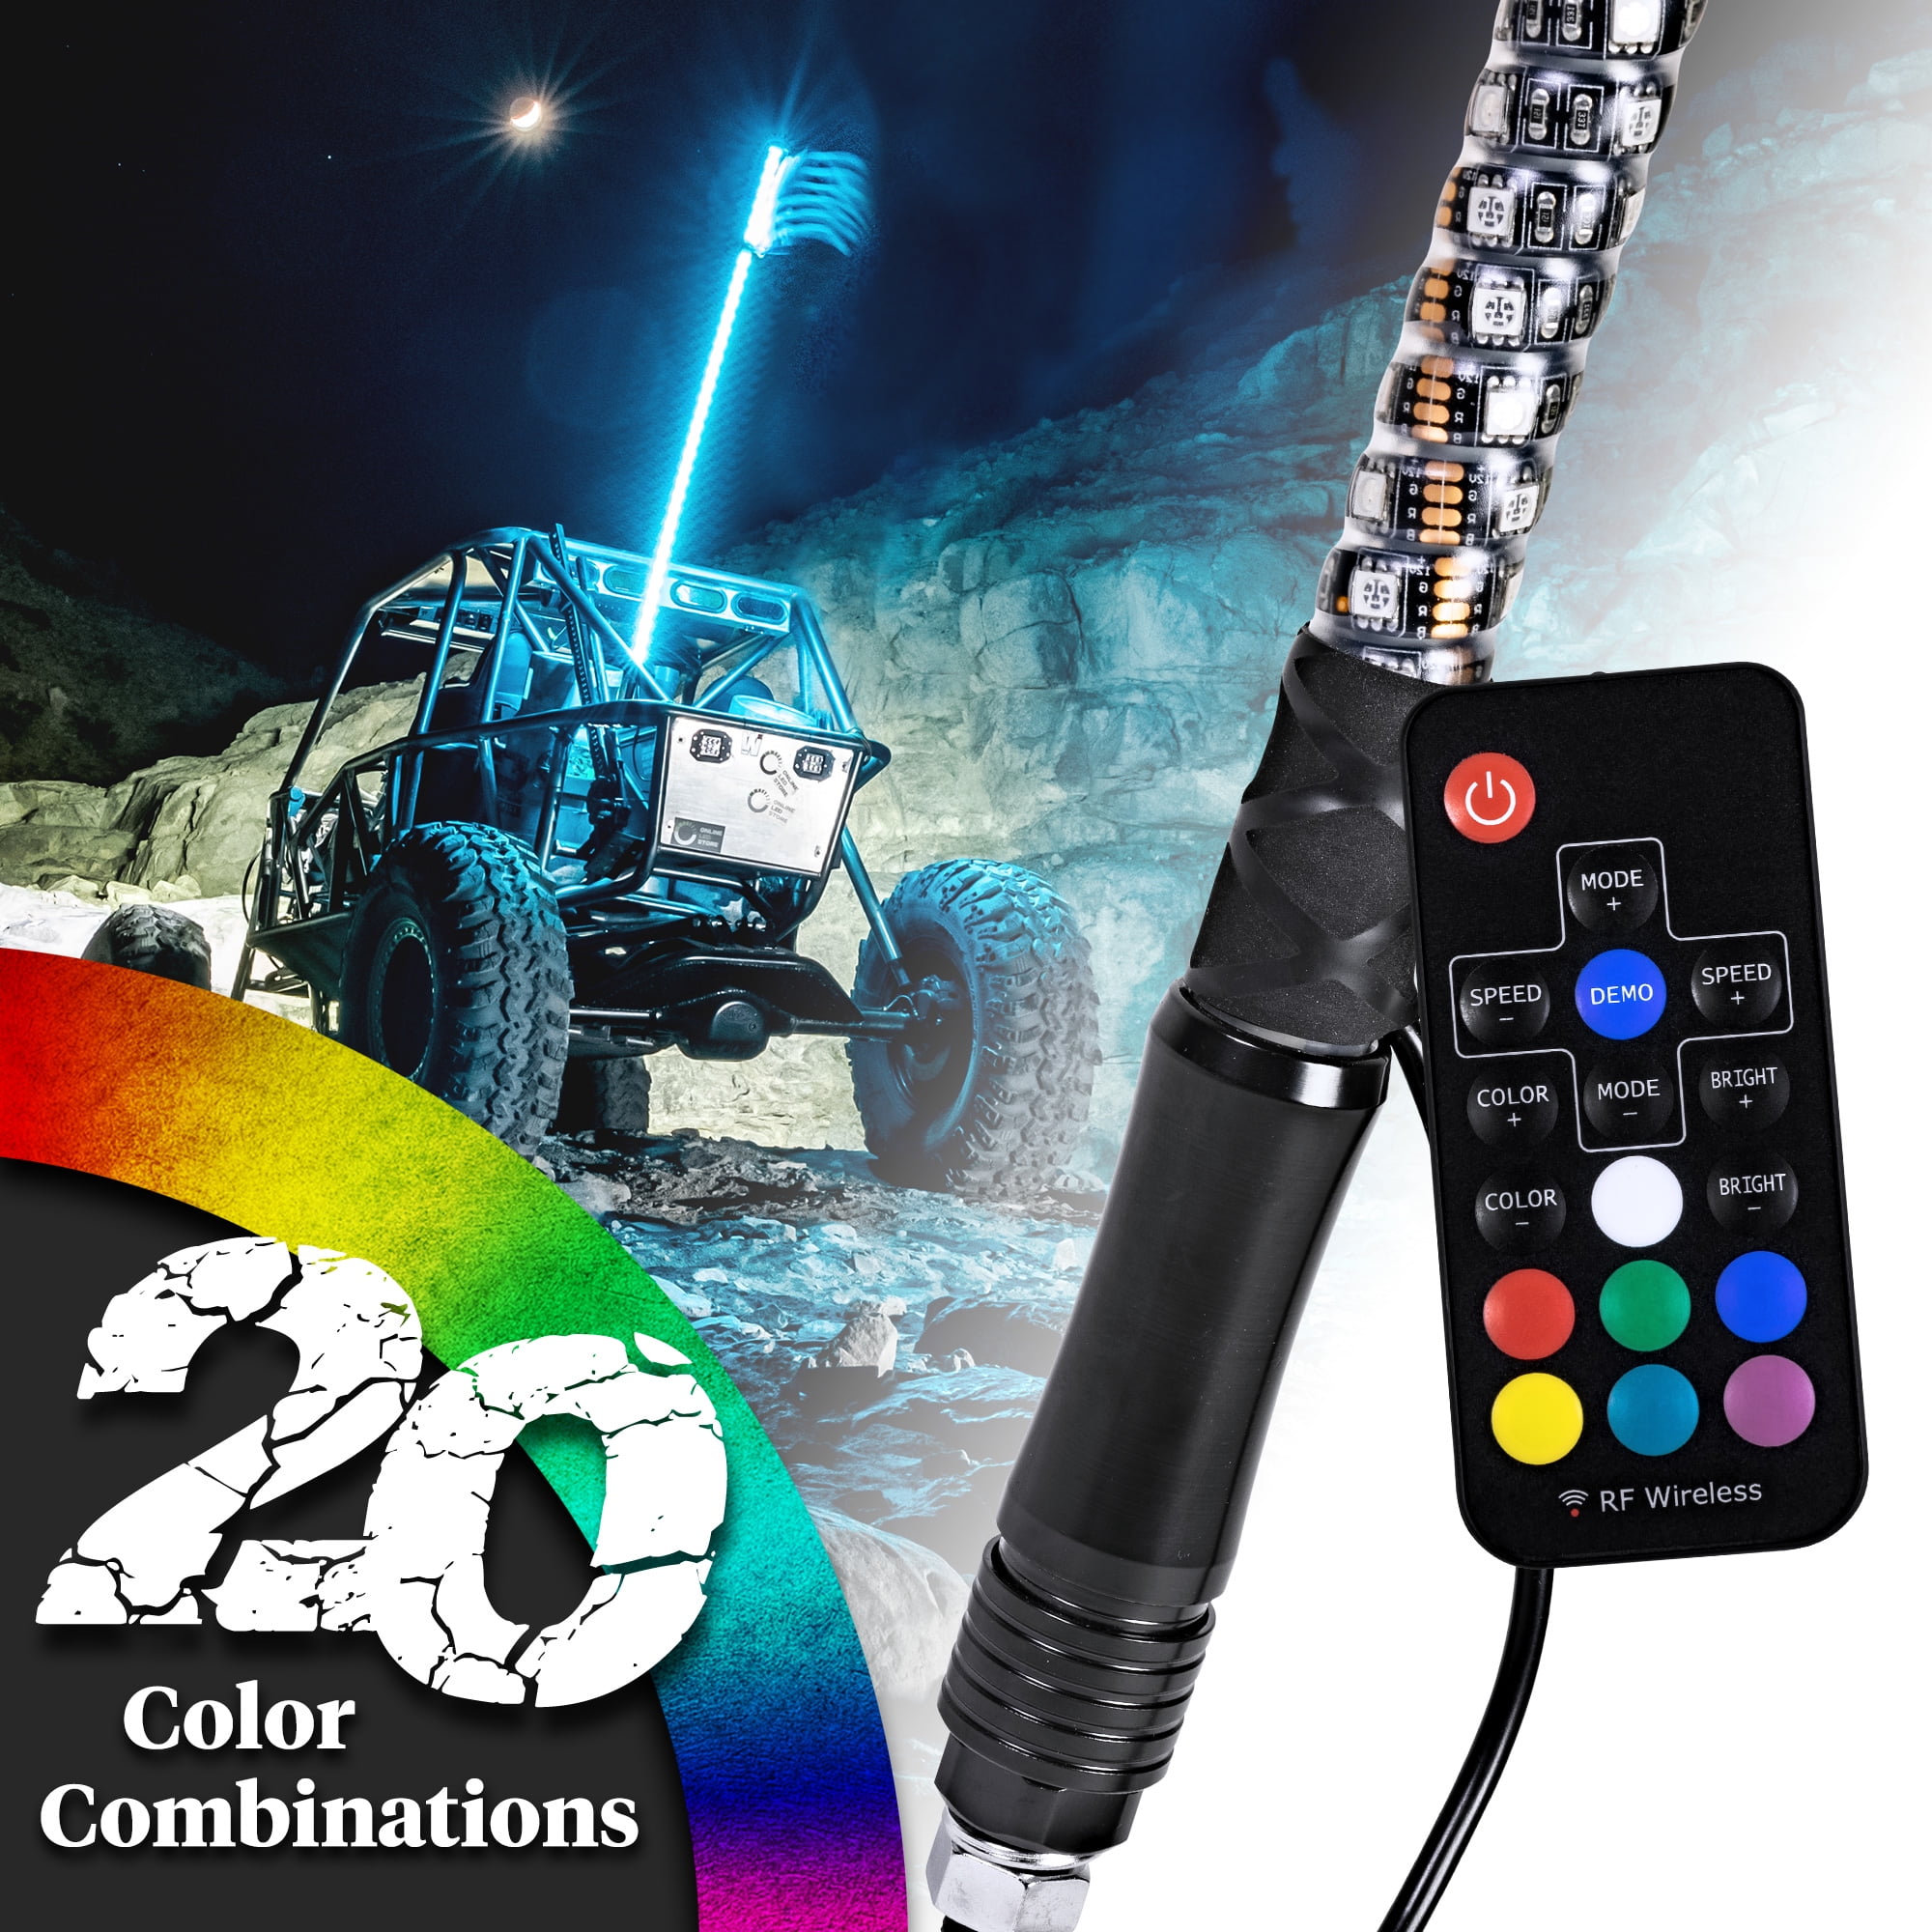 One Whip AL4X4 5FT LED Whip Lights 360°Spiraling Rising Dream Wrapped Dancing Whips Bluetooth Controlled with Music Mode for Polaris RZR ATV Antenna Whip UTV Quad Sand Dune Buggy Flag Poles 